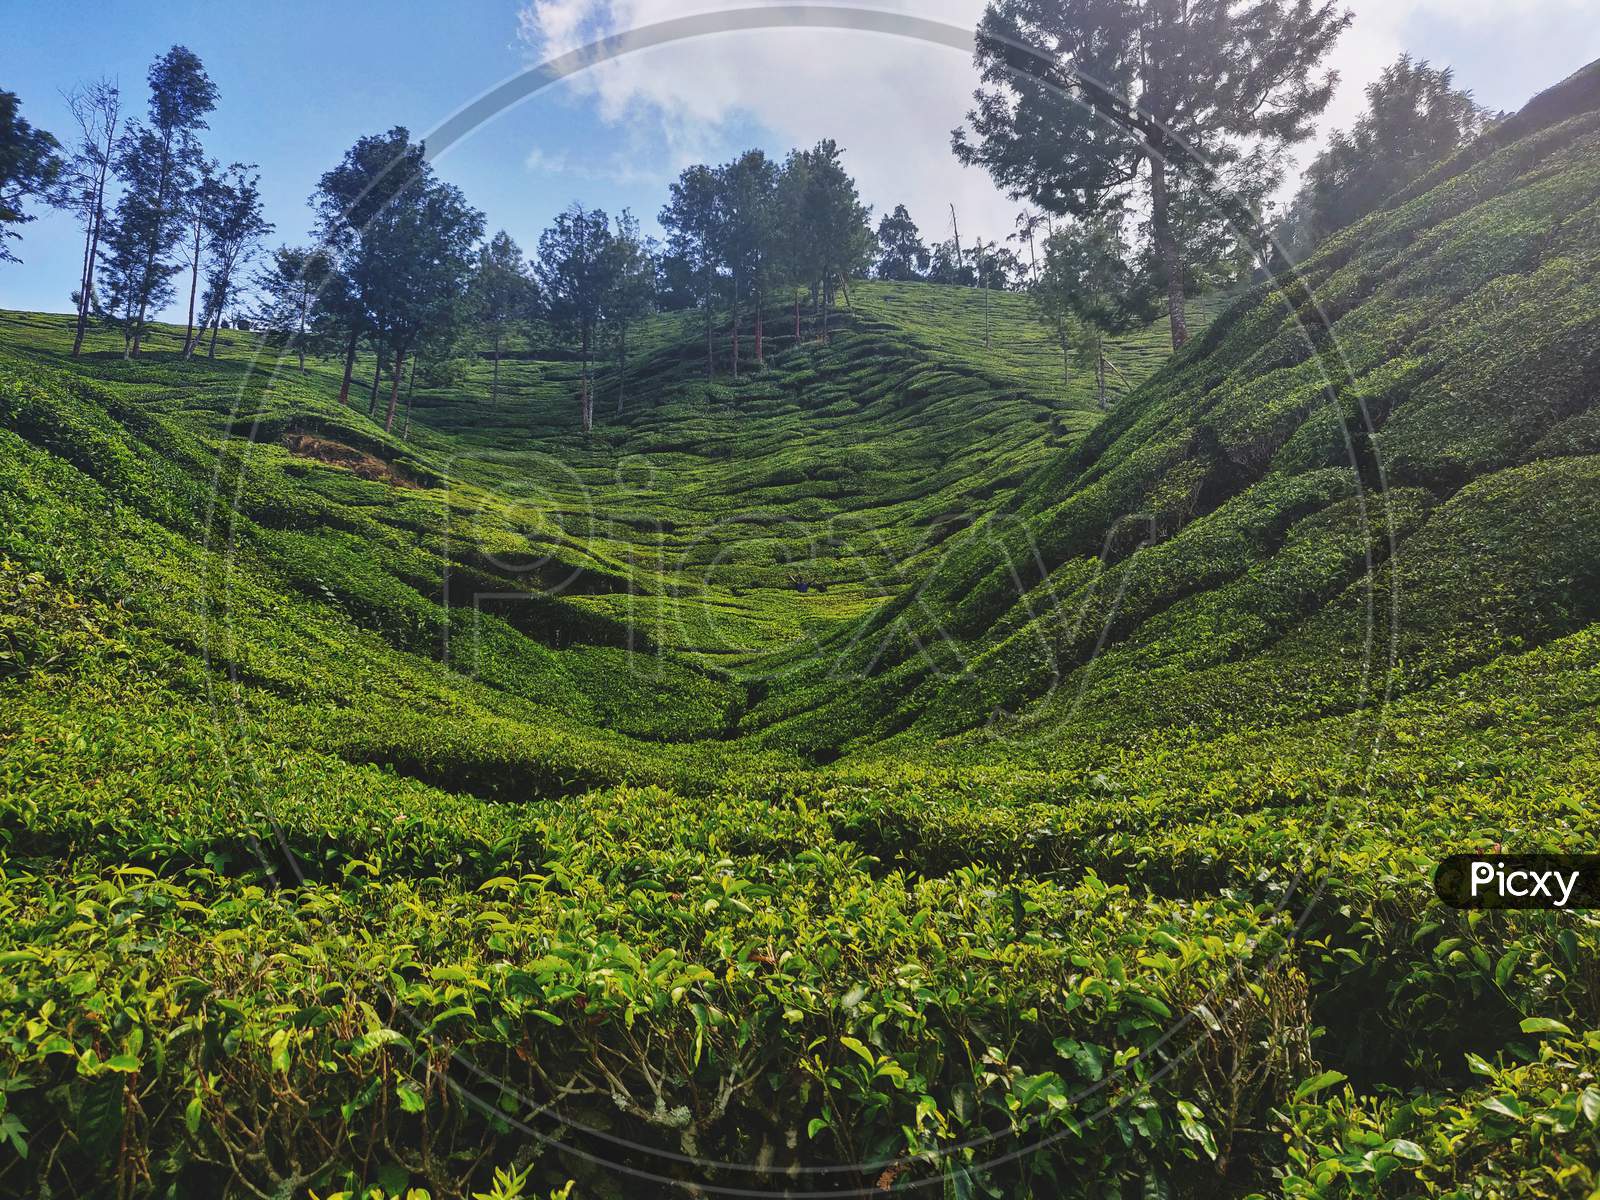 Beautiful Scenery Of Hilly Tea Estate (Tea Plantations) In Munnar Hill Station, Kerala, India. Green All Over With Trees And Sky On The Background.